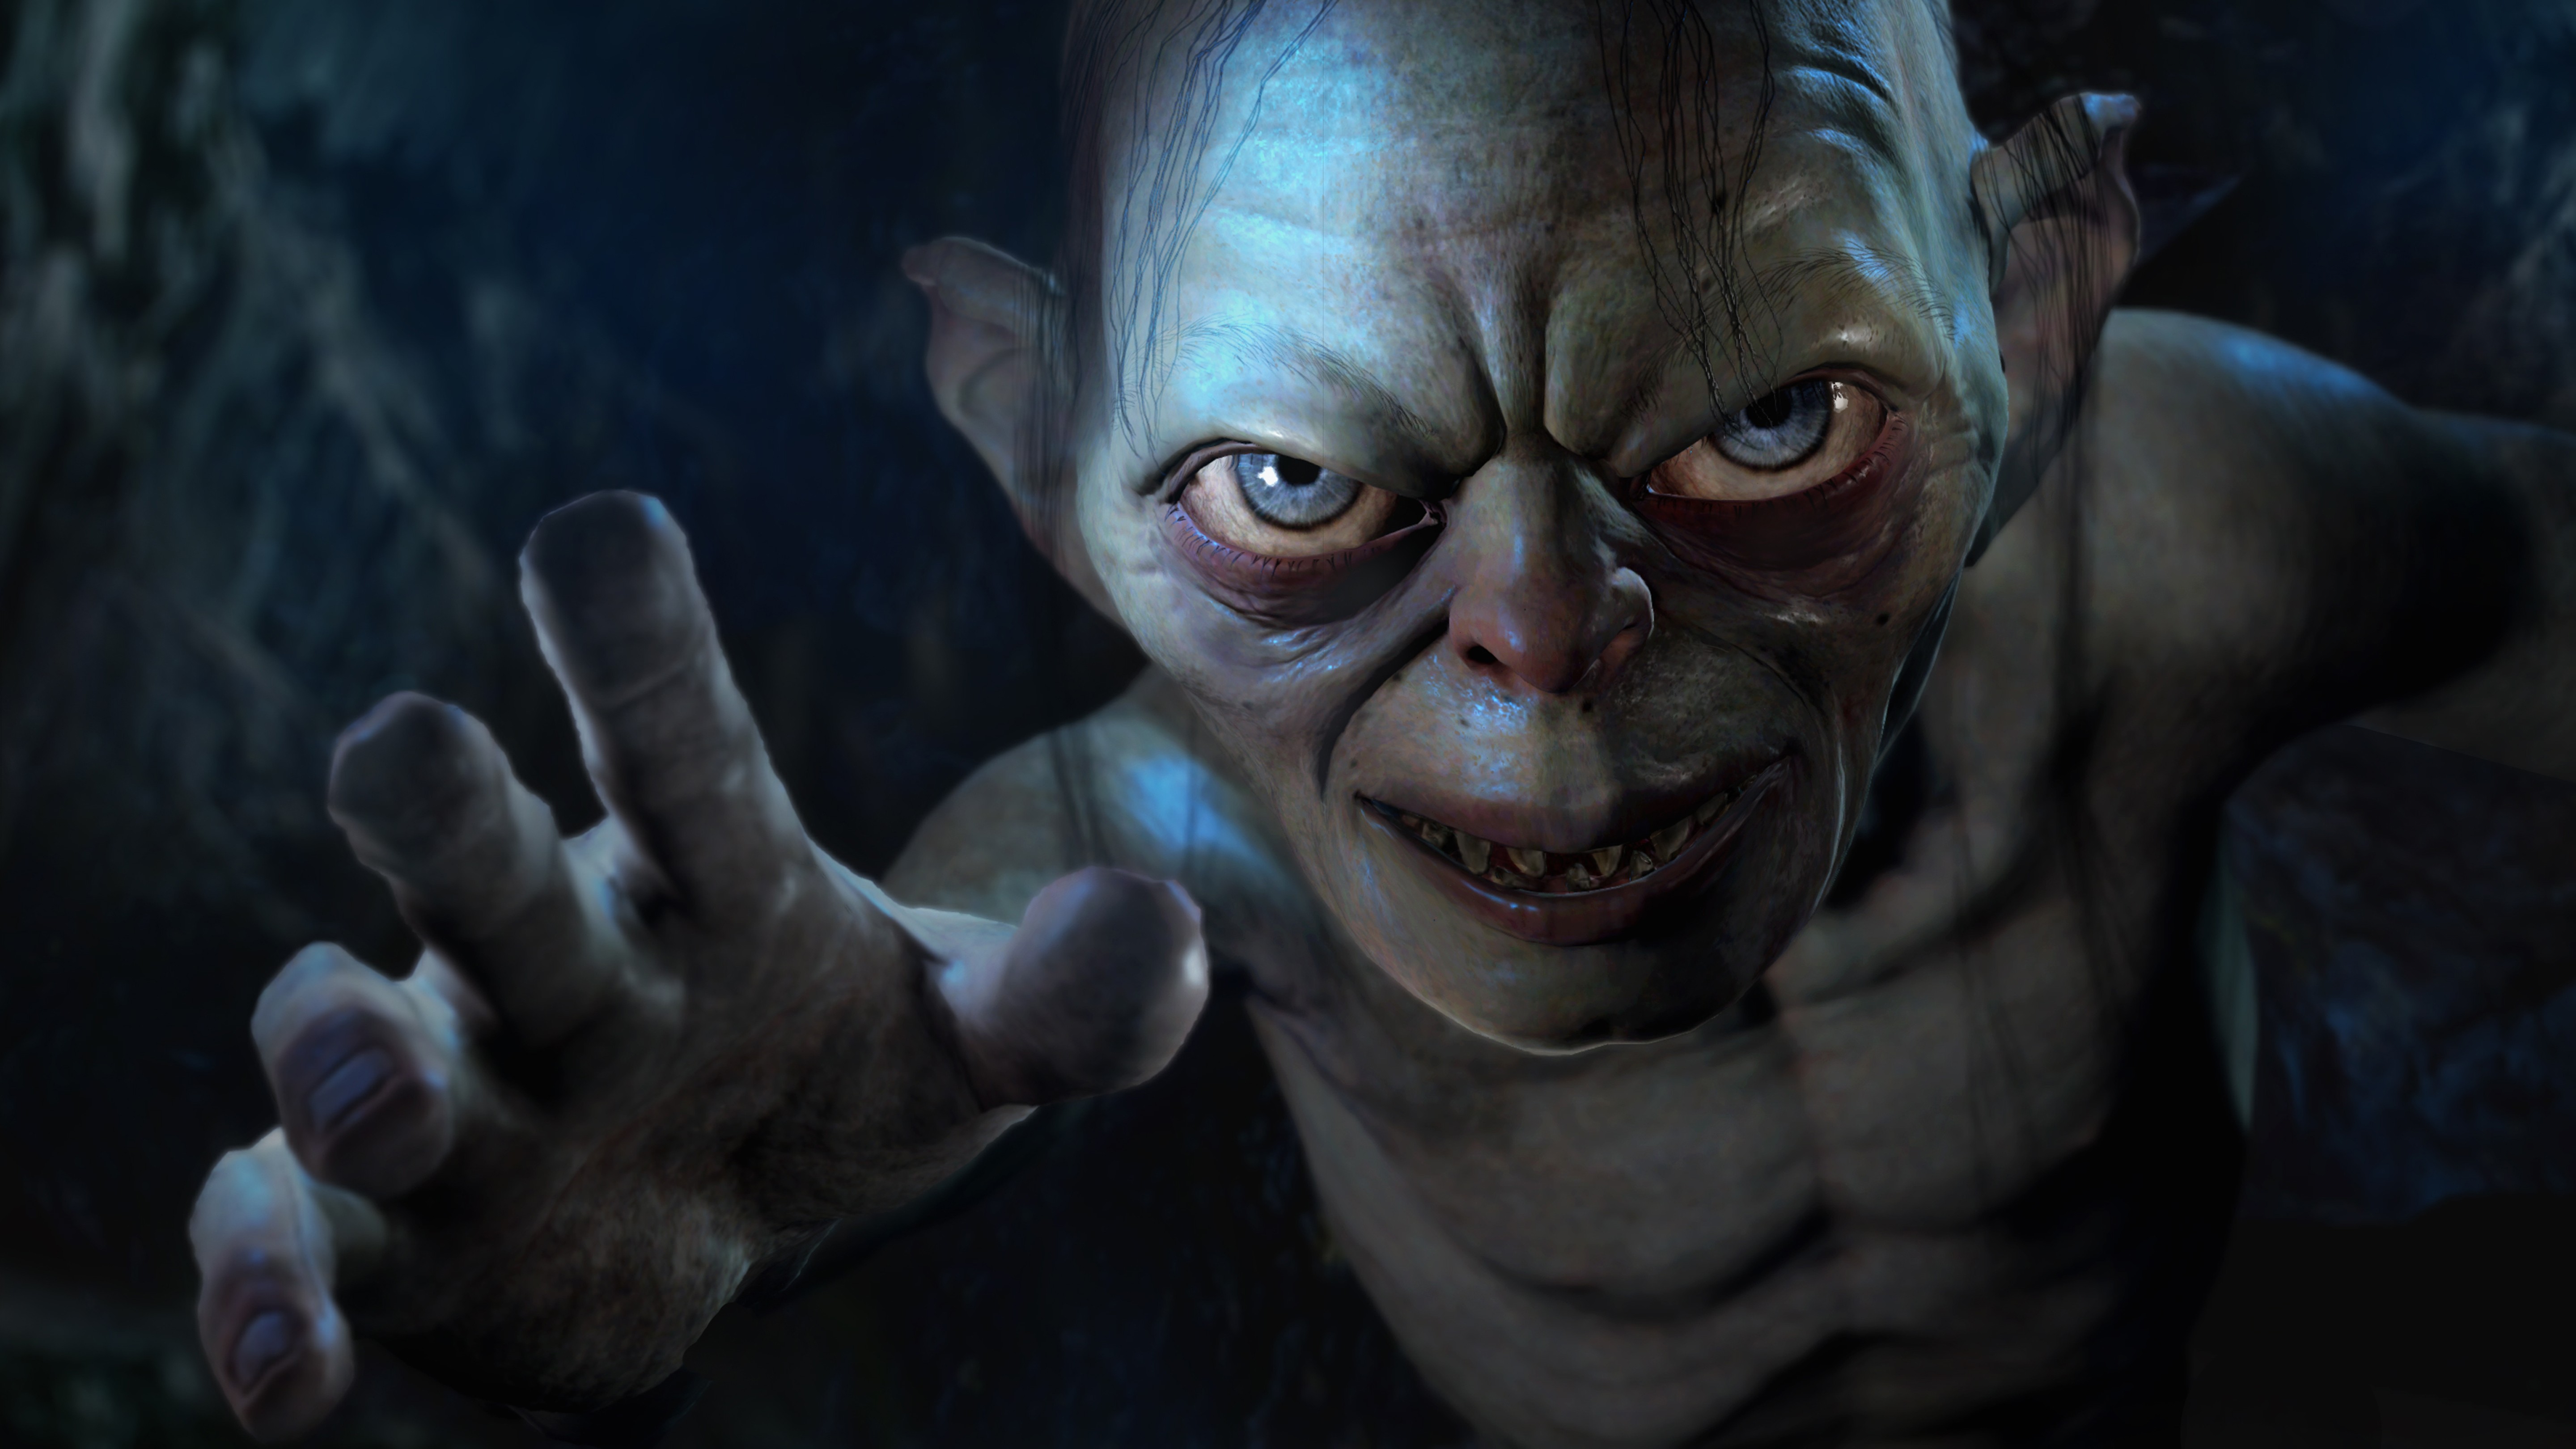 Wallpaper video games gollum middle earth shadow of mordor darkness screenshot fictional character special effects x